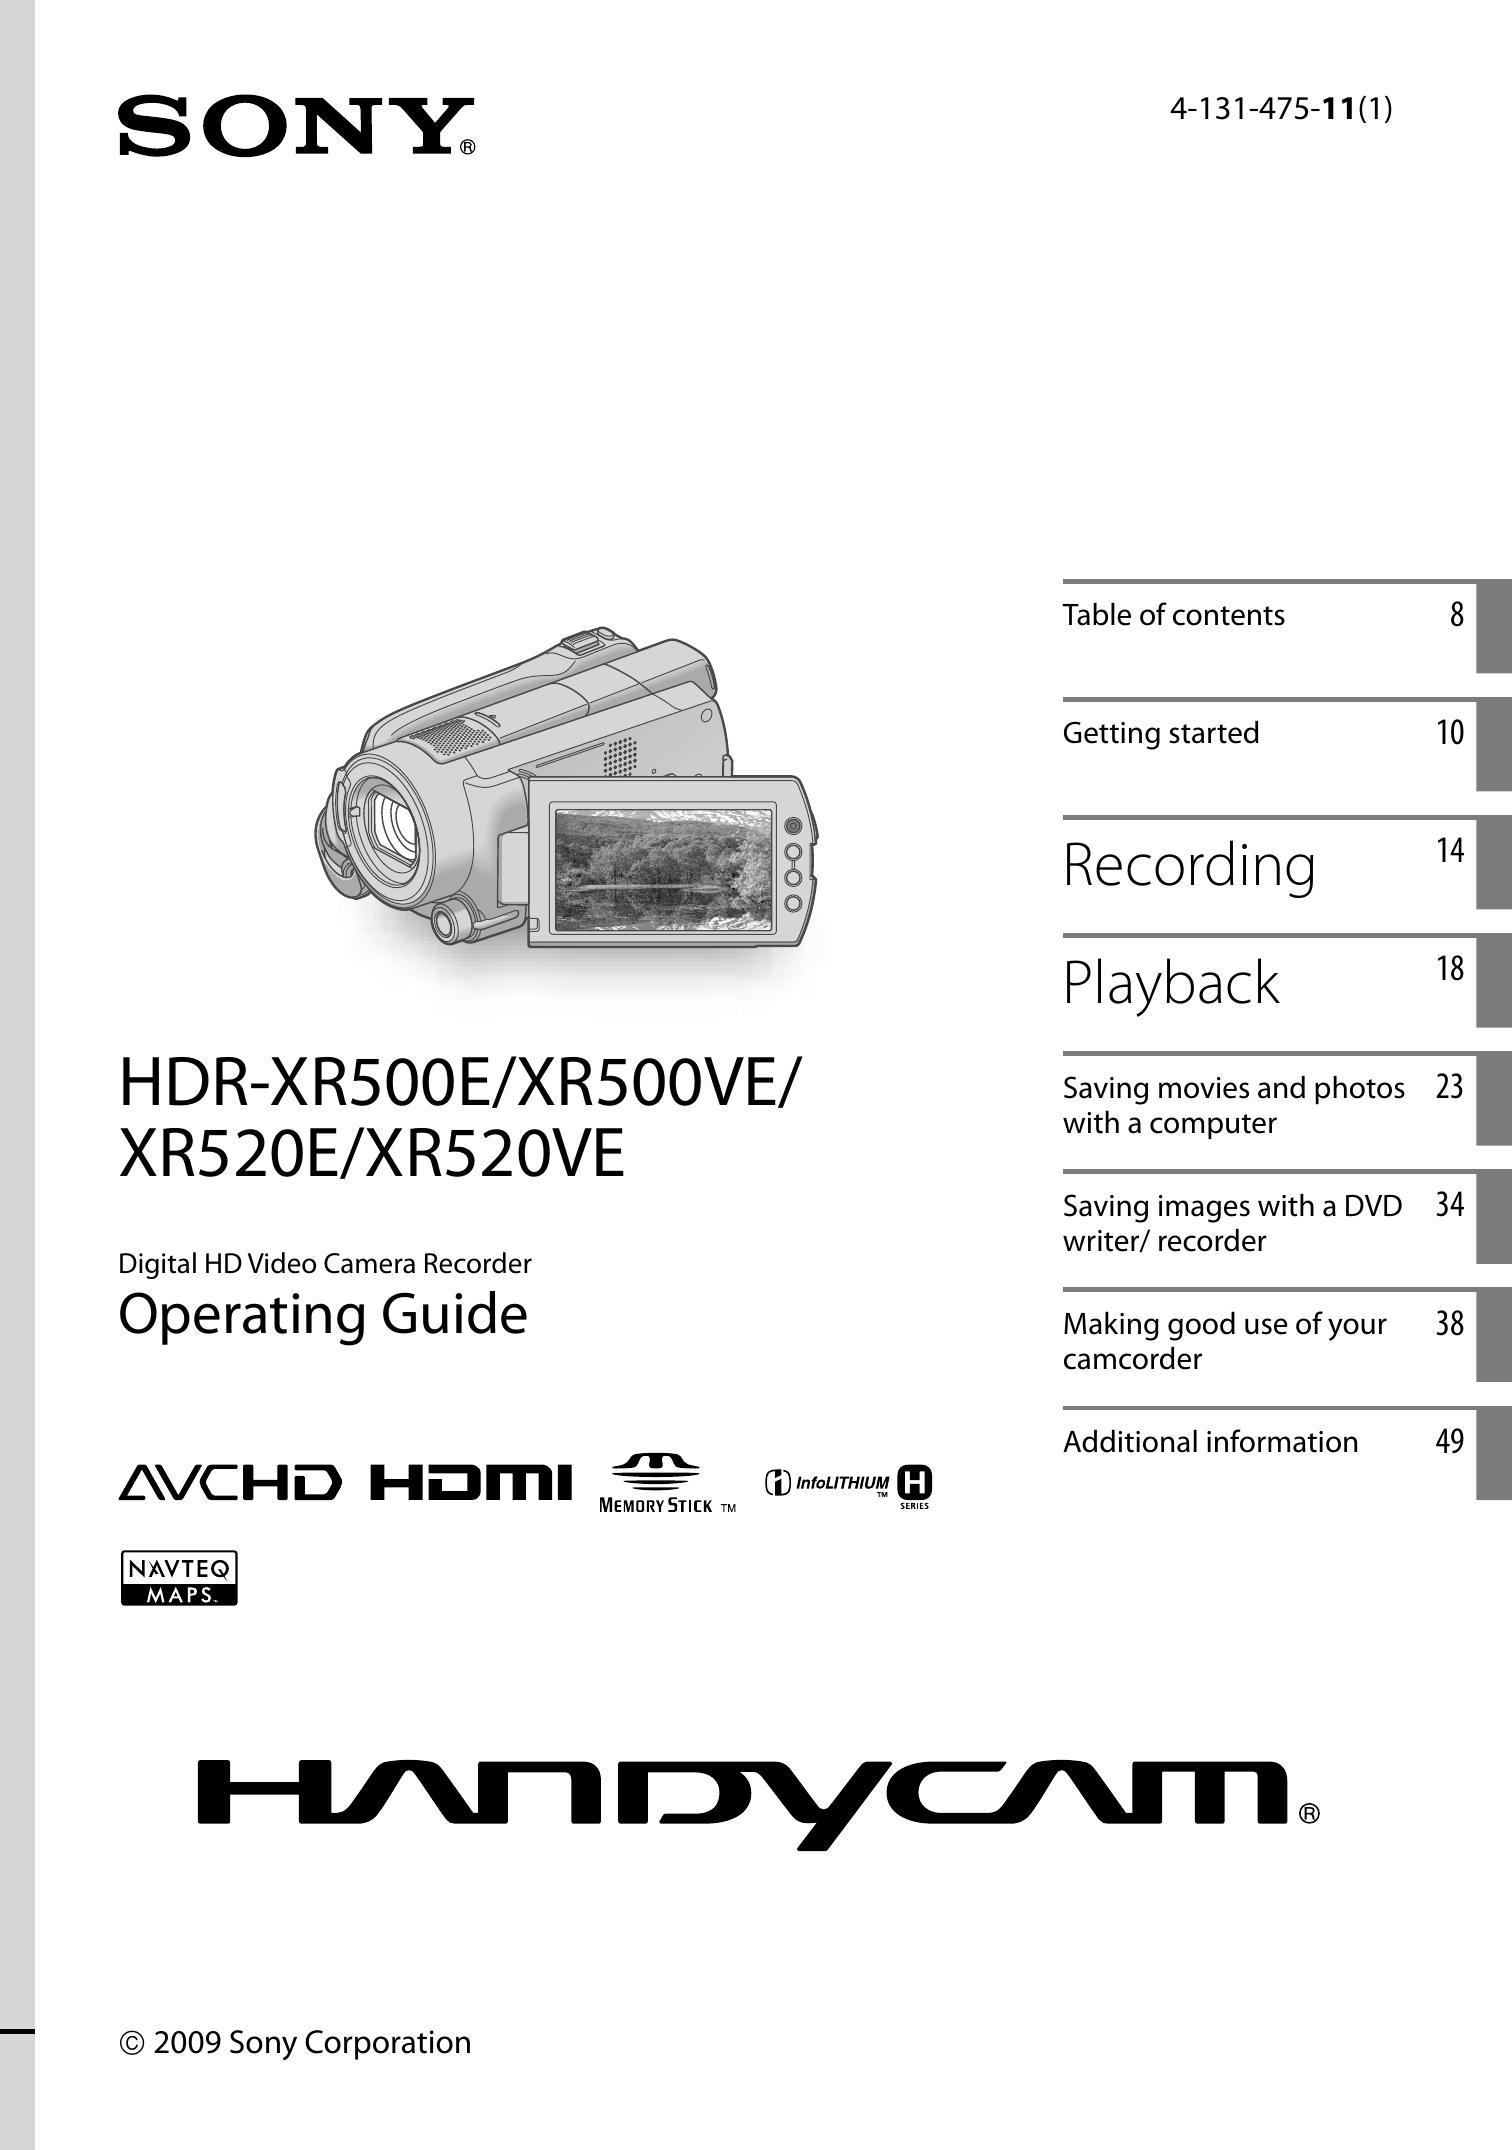 Sony 4-131-475-11(1) Camcorder User Manual